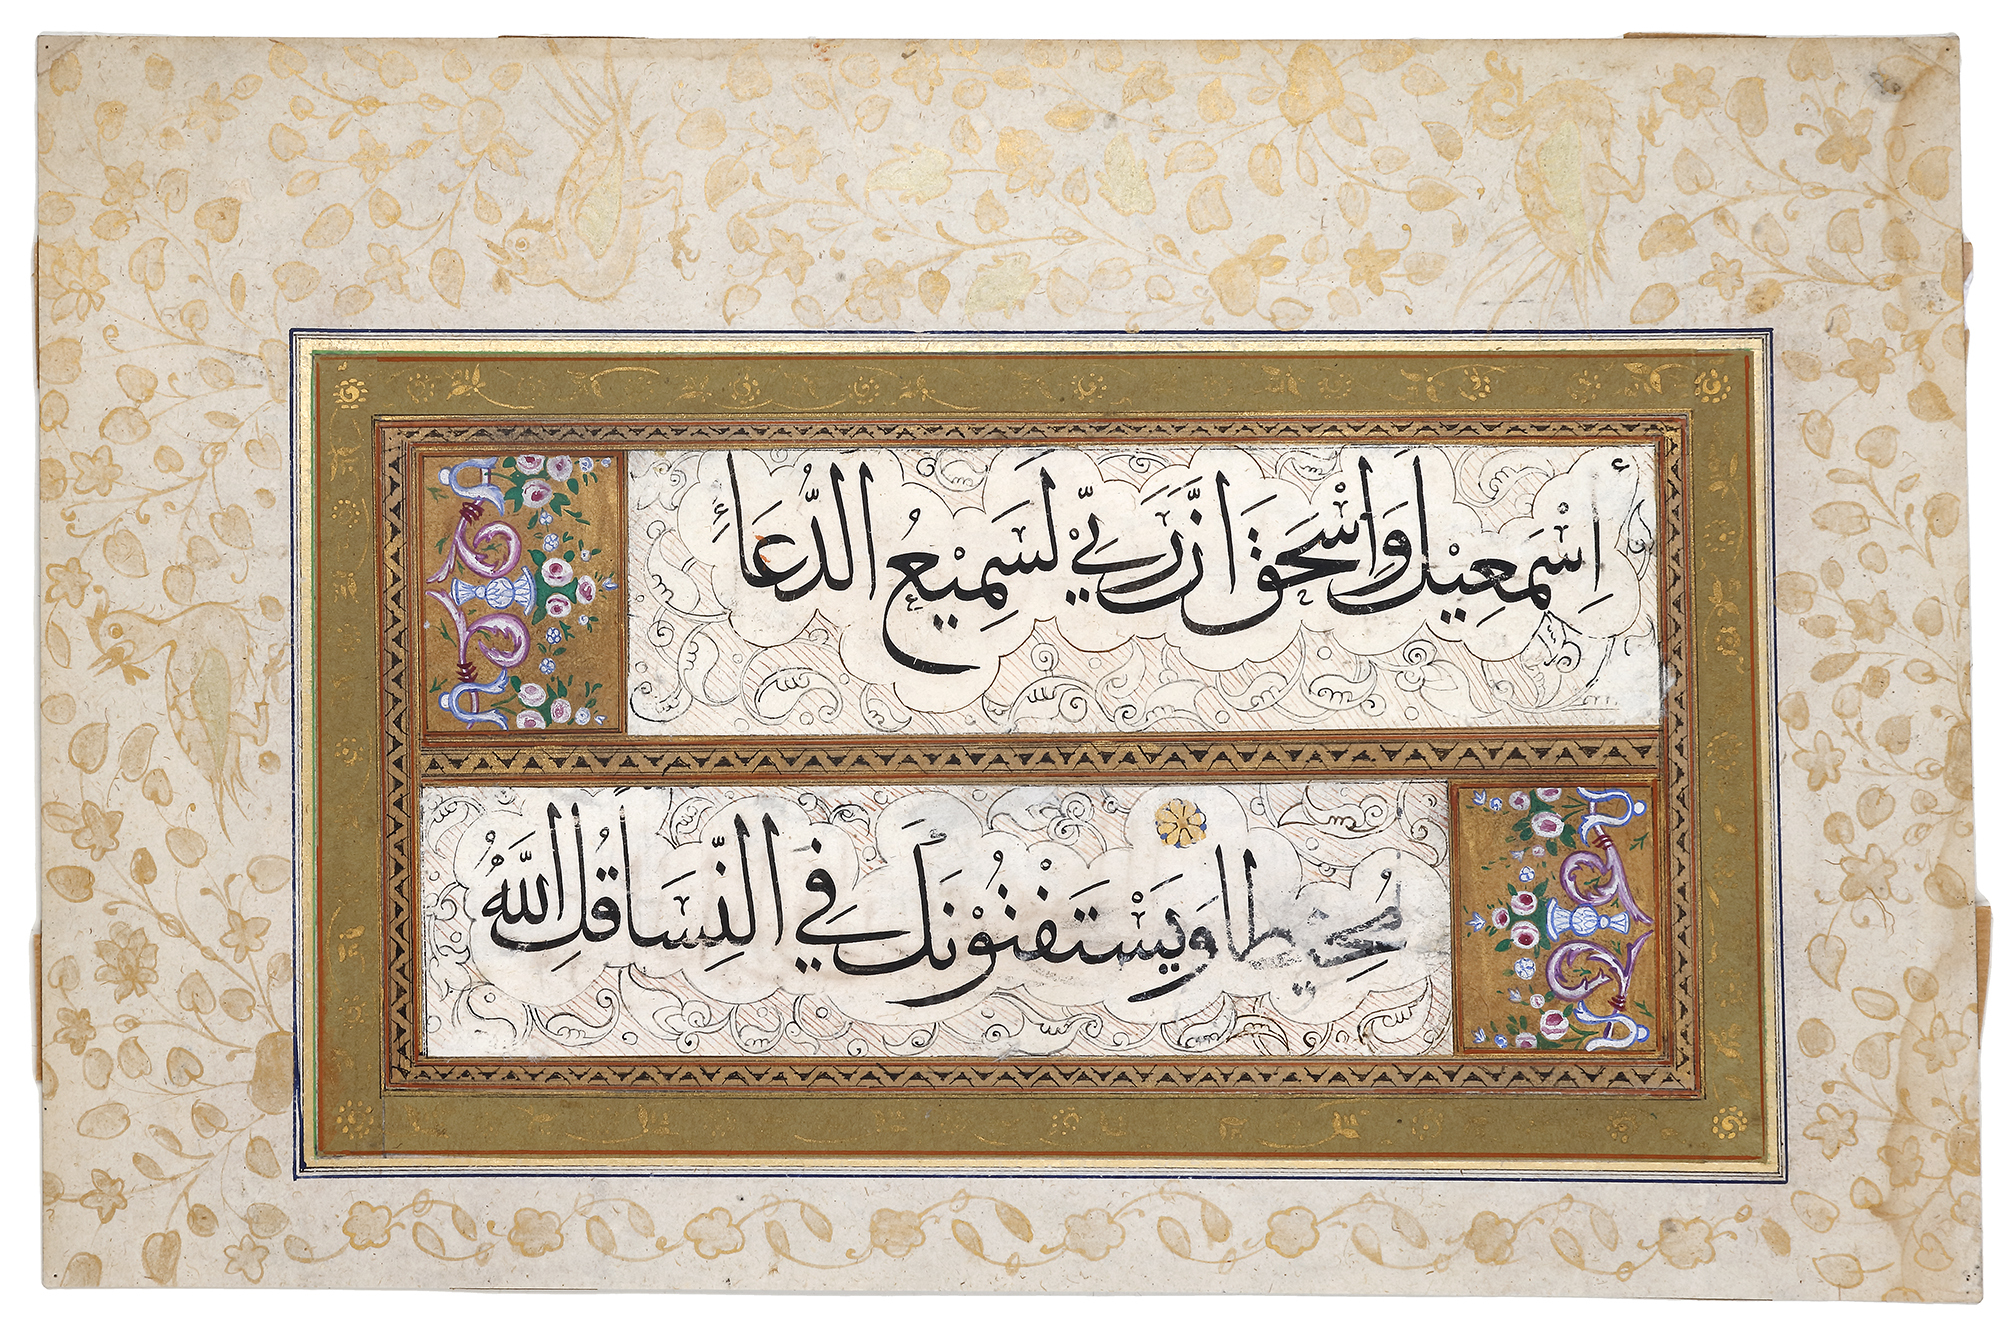 TWO CALLIGRAPHIC ALBUM PAGES WRITTEN IN THULUTH, OTTOMAN TURKEY, 18TH CENTURY - Image 3 of 4